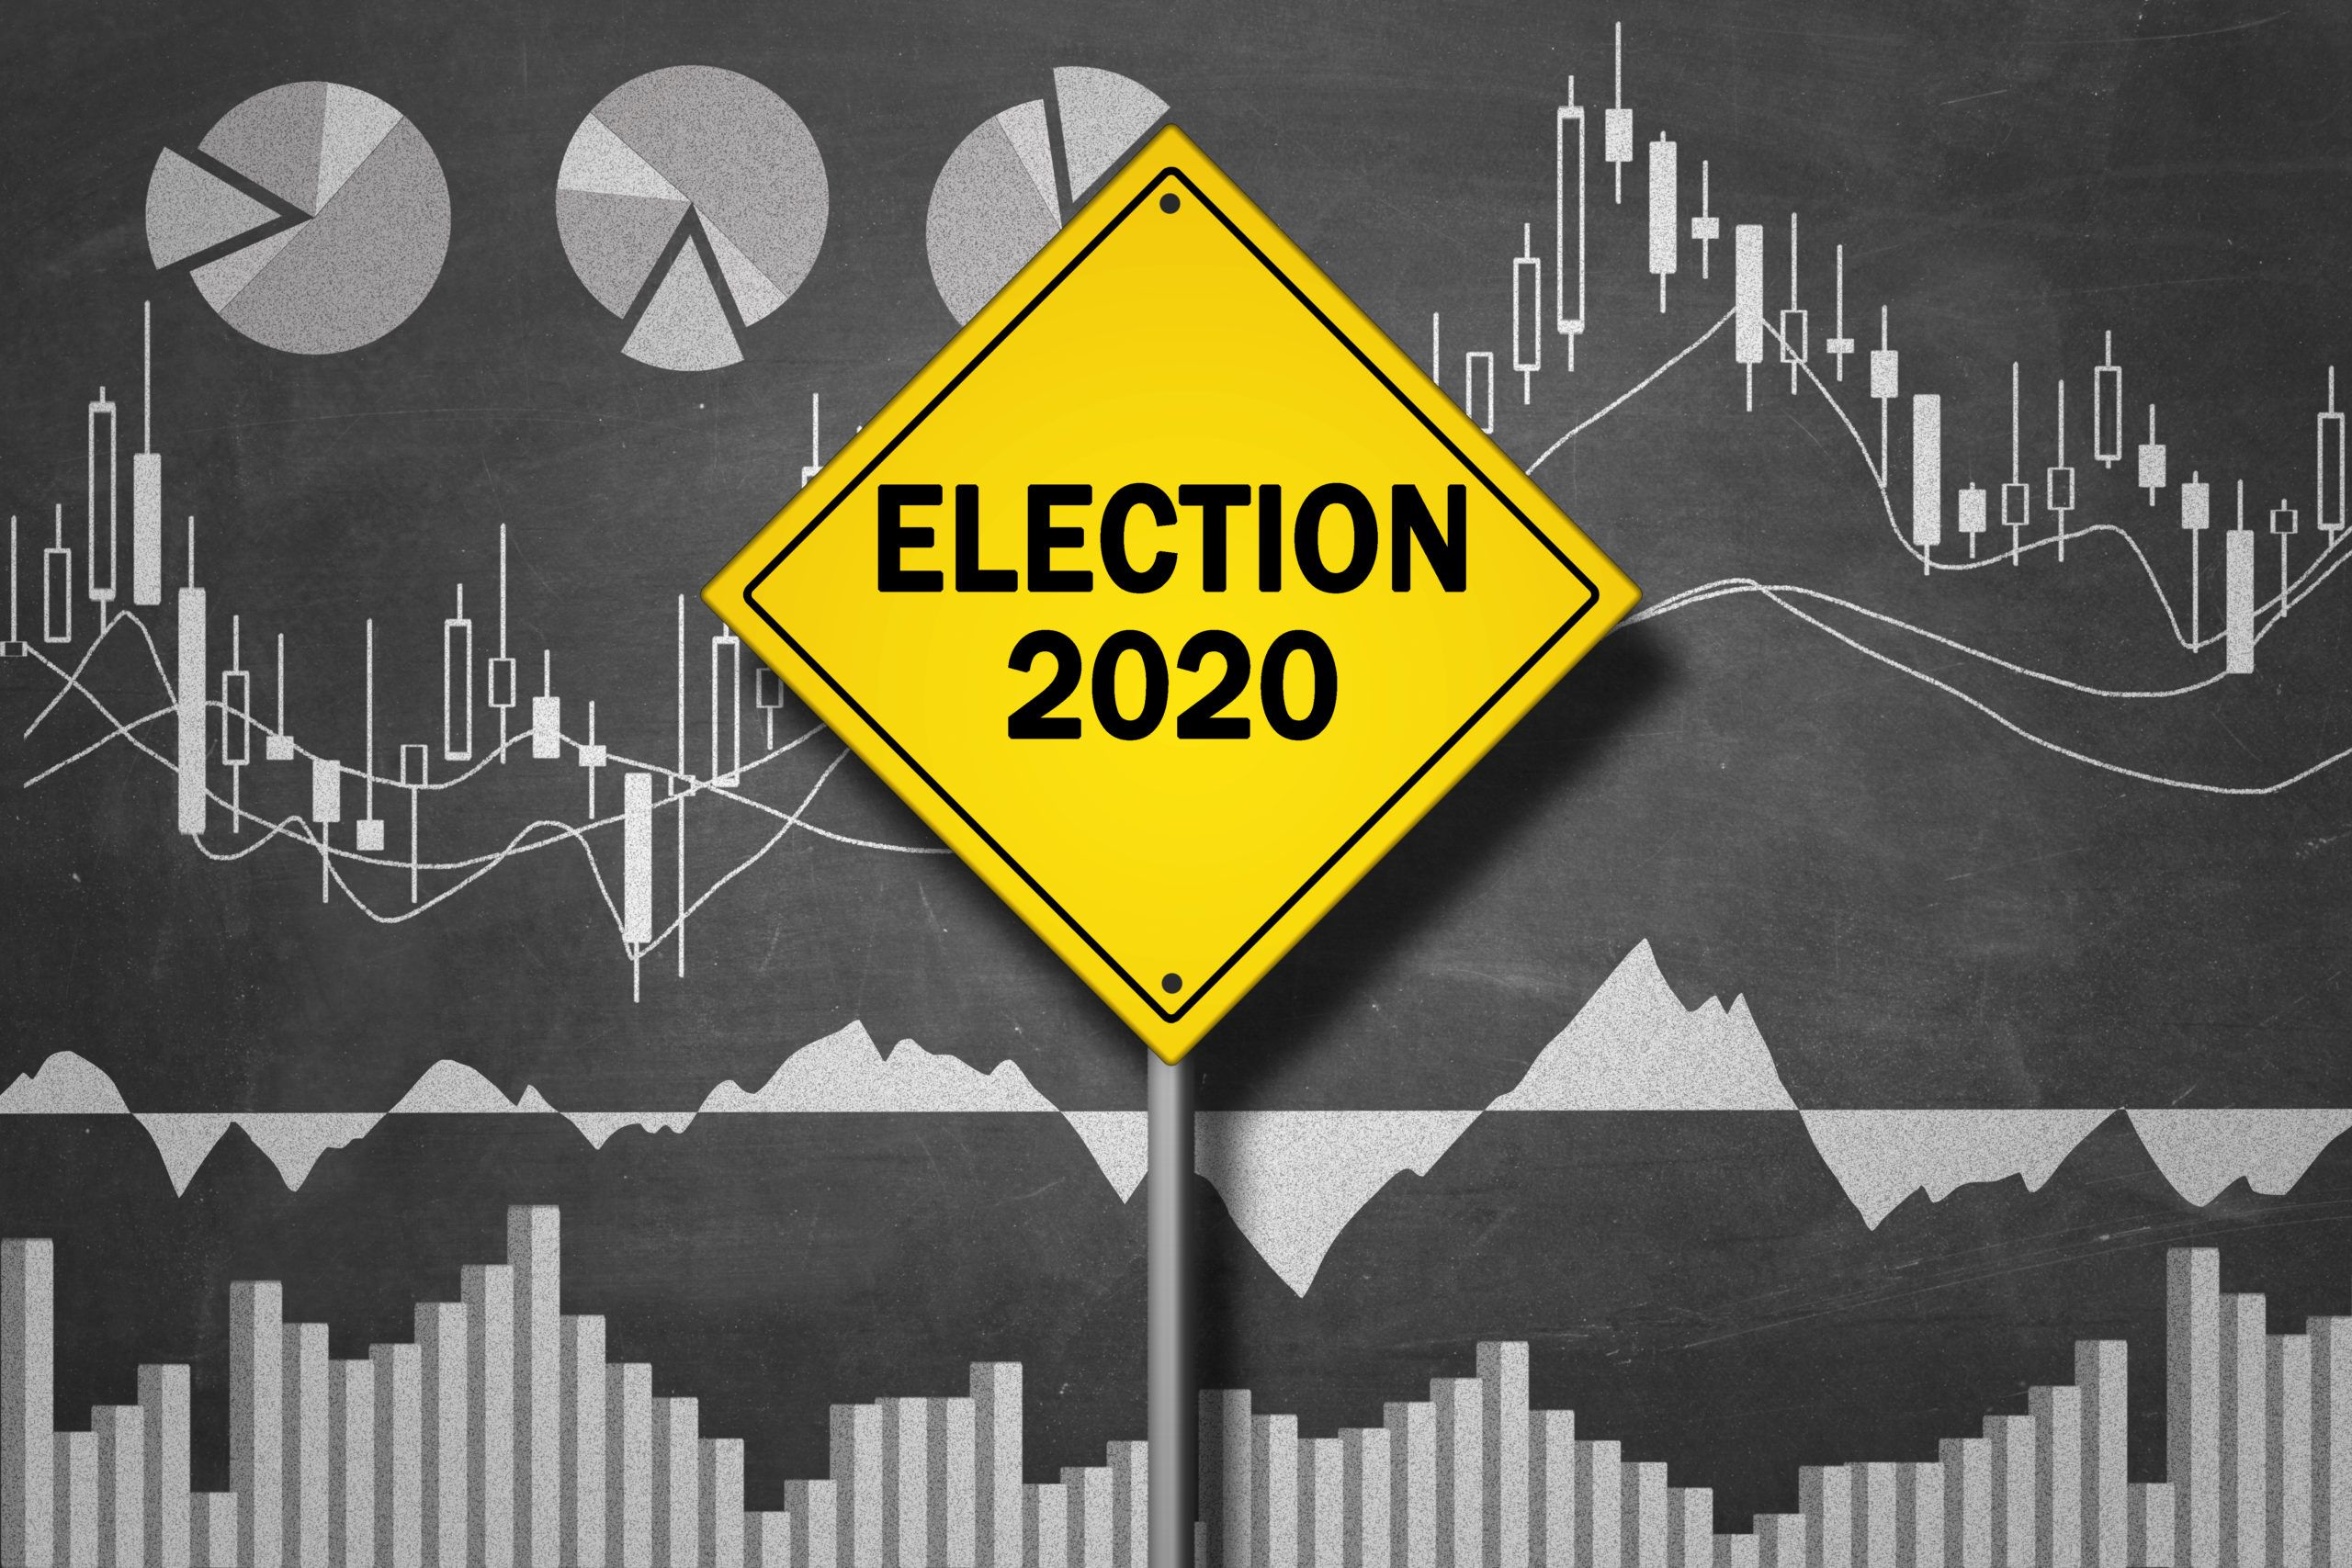 US election results appear market-friendly